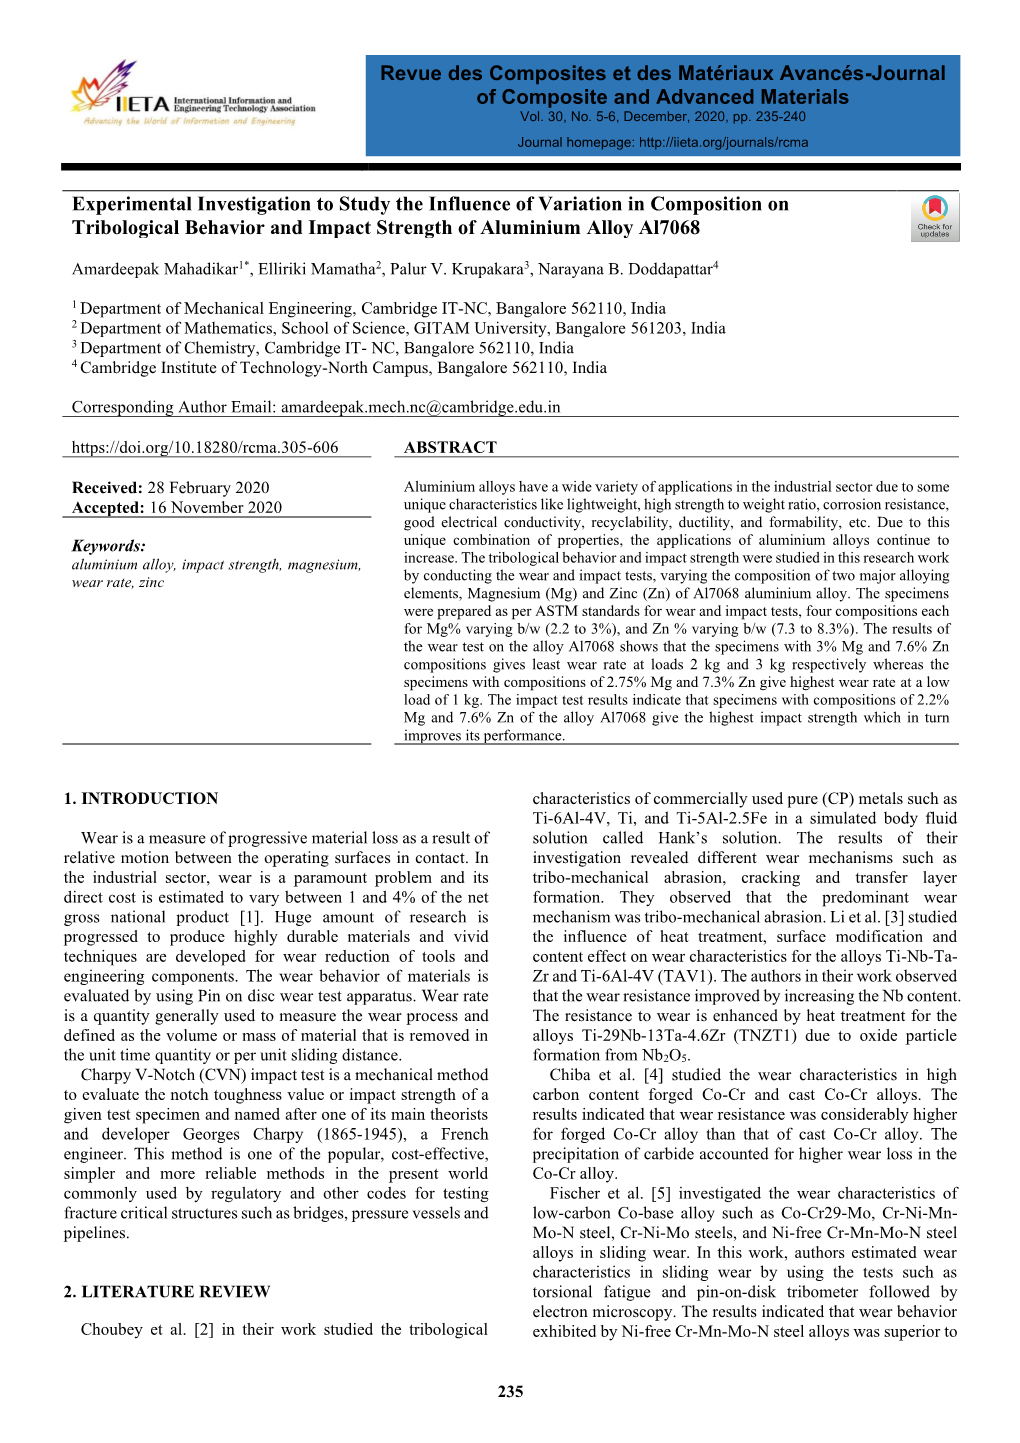 Experimental Investigation to Study the Influence of Variation in Composition on Tribological Behavior and Impact Strength of Aluminium Alloy Al7068